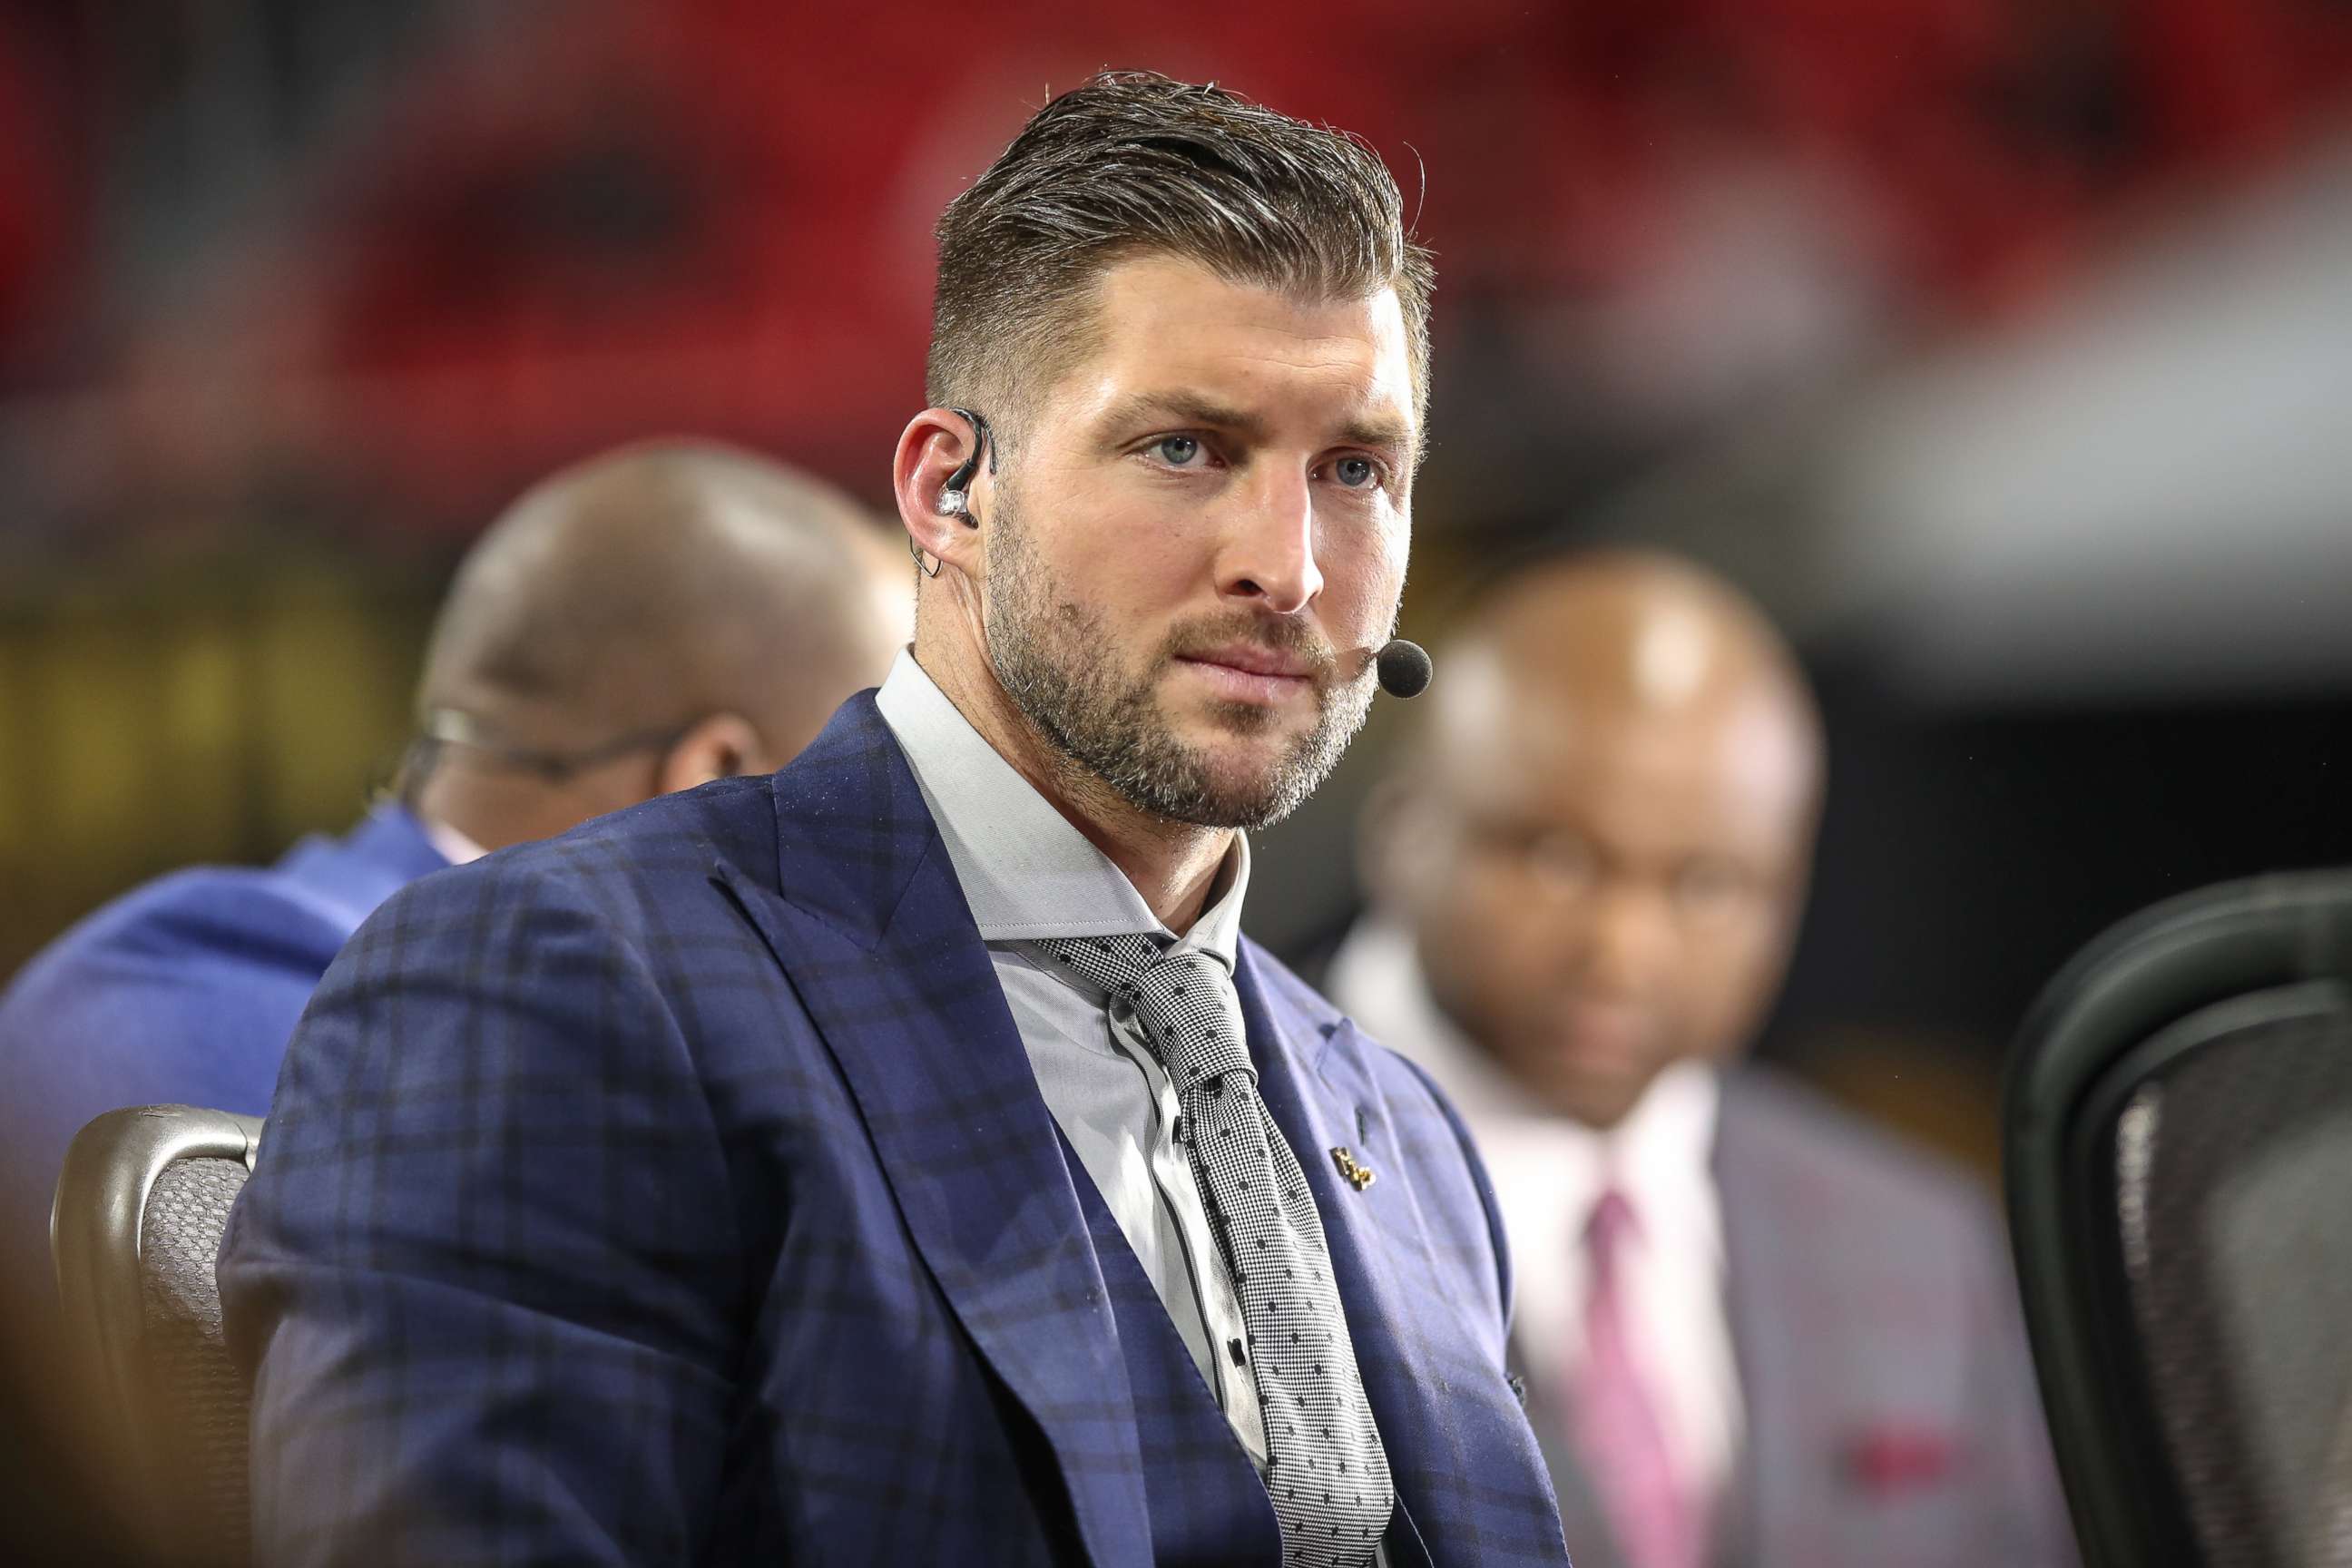 PHOTO: Tim Tebow looks on before the College Football Playoff National Championship Game between the Alabama Crimson Tide and the Georgia Bulldogs on January 8, 2018 at Mercedes-Benz Stadium in Atlanta, GA.